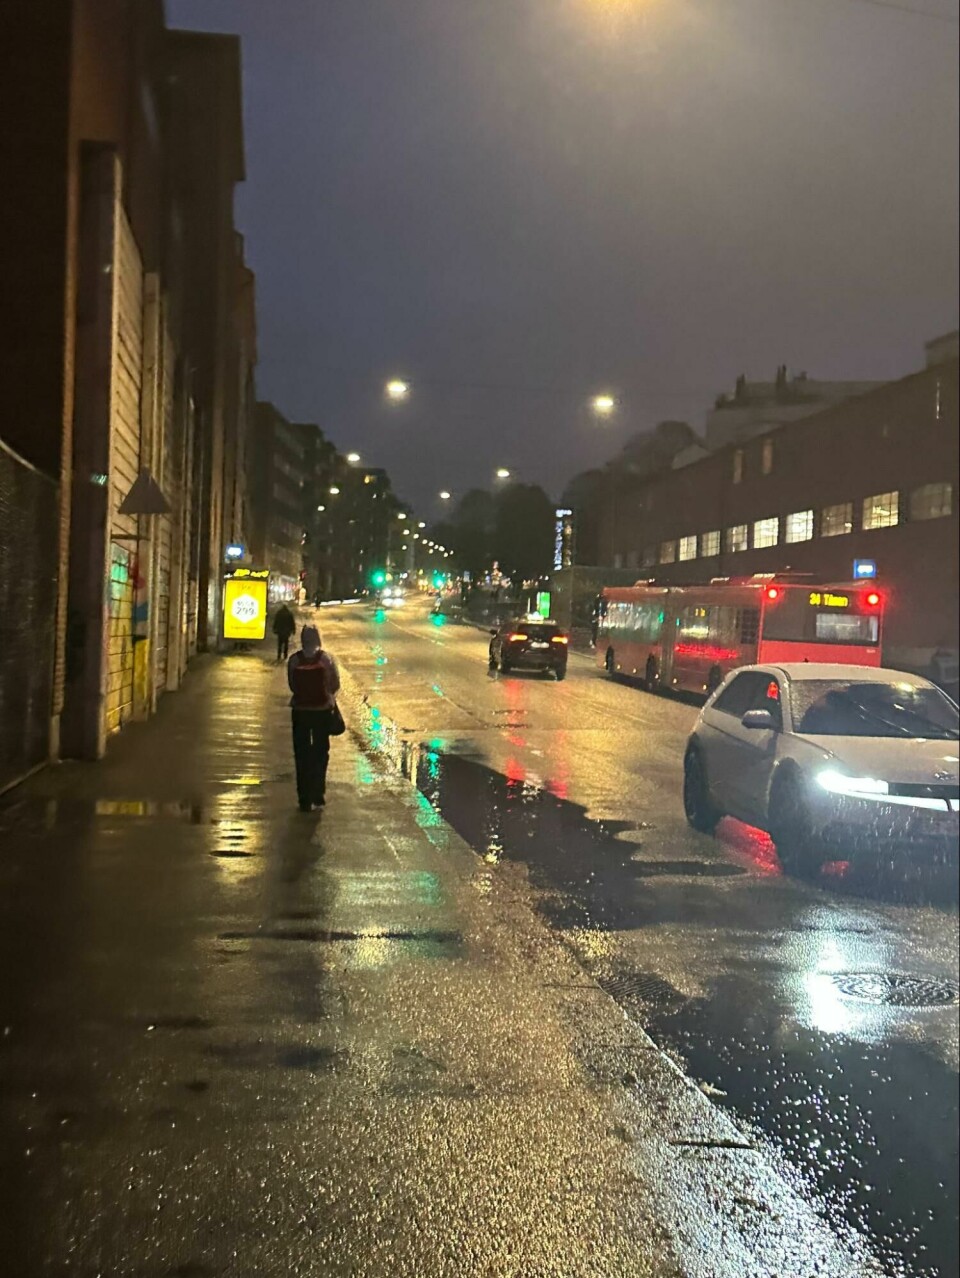 A rainy night for commuters in Oslo